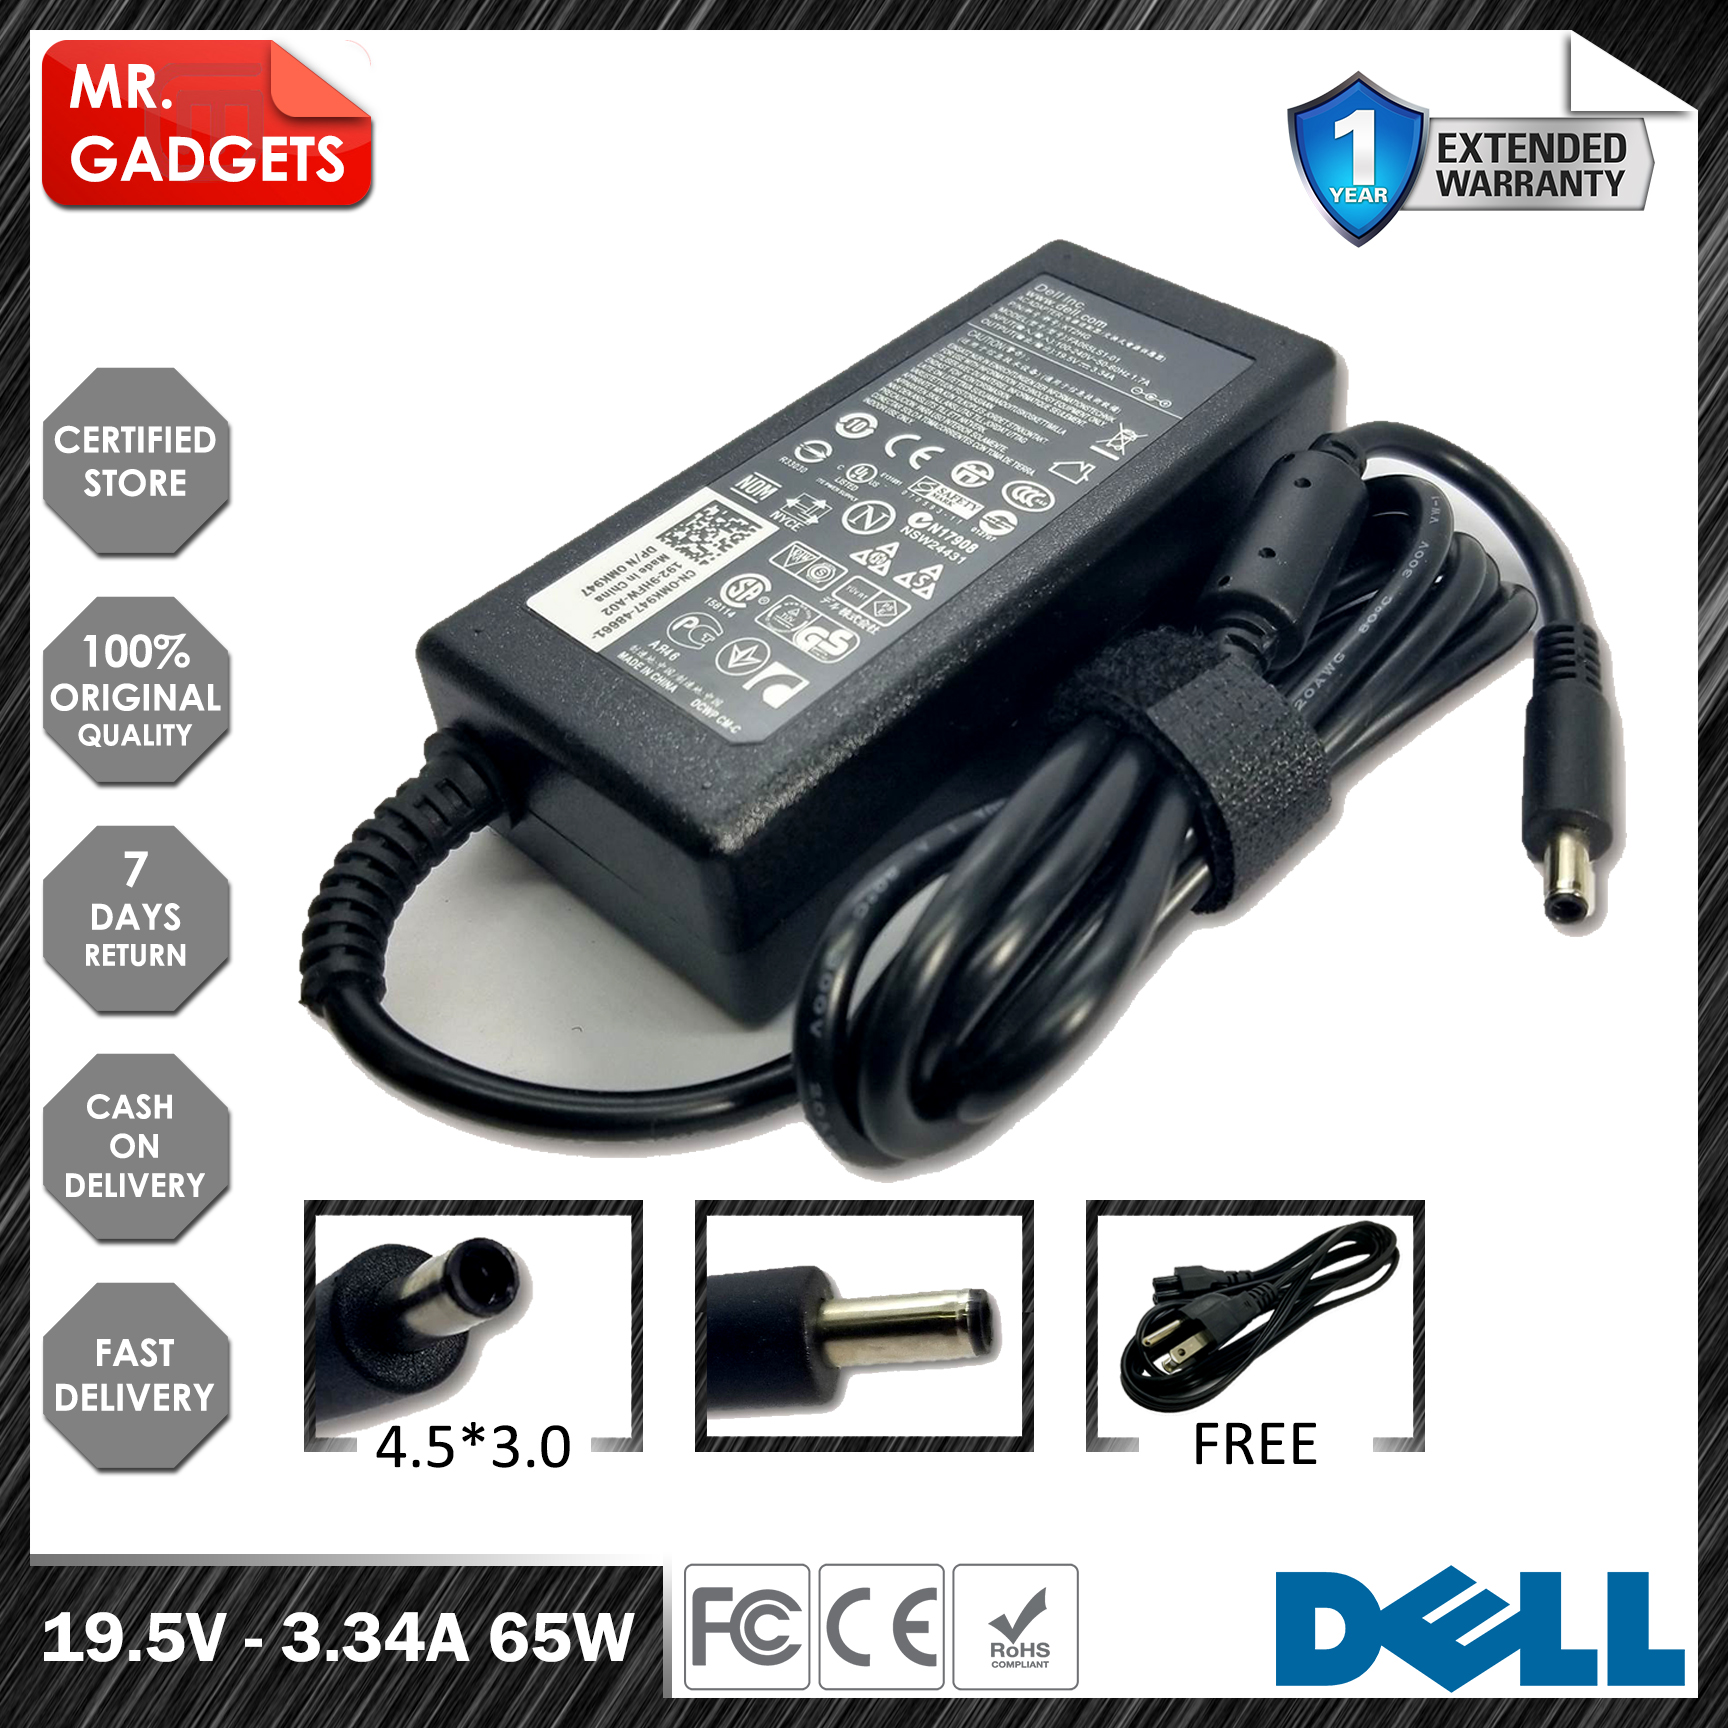 Laptop Charger    x  for DELL Inspiron 15 7000 Series  (7537) Inspiron 5551 Inspiron 5555 Inspiron 5558 Inspiron 5758 OptiPlex  3020 Micro OptiPlex 9020 Micro Vostro 3558 | Lazada PH